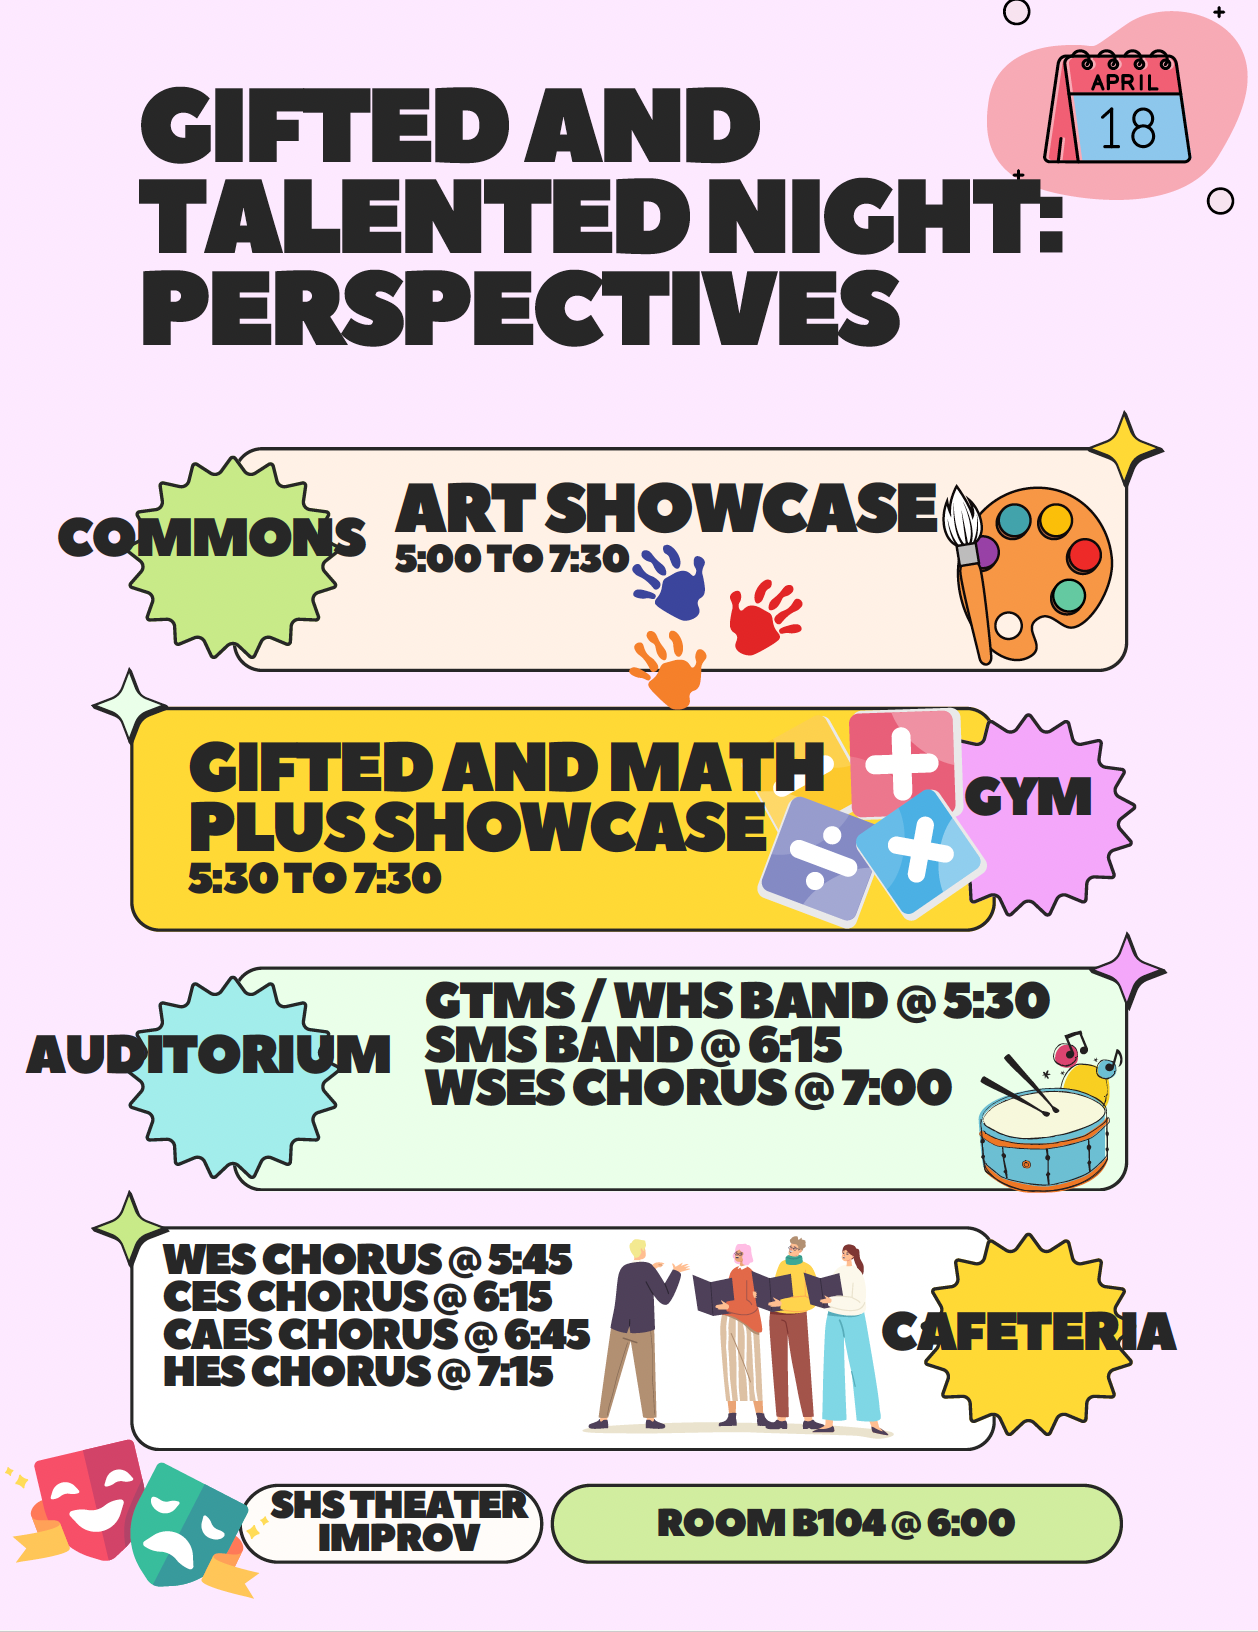 Gifted & Talented Night Scheduyle